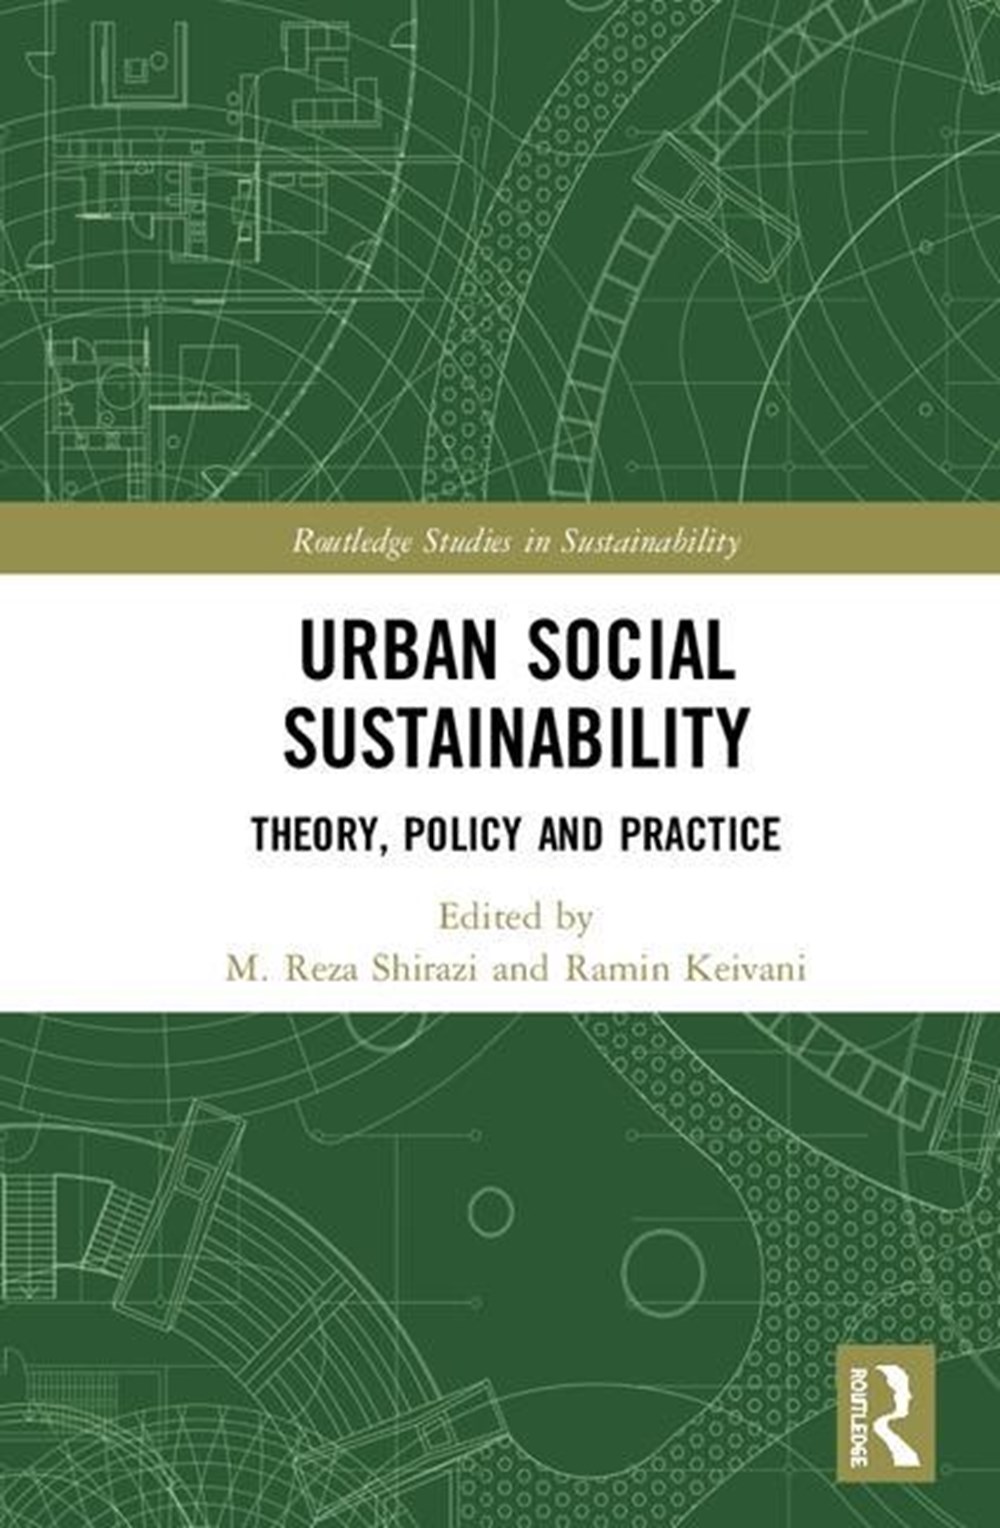 Urban Social Sustainability: Theory, Policy and Practice